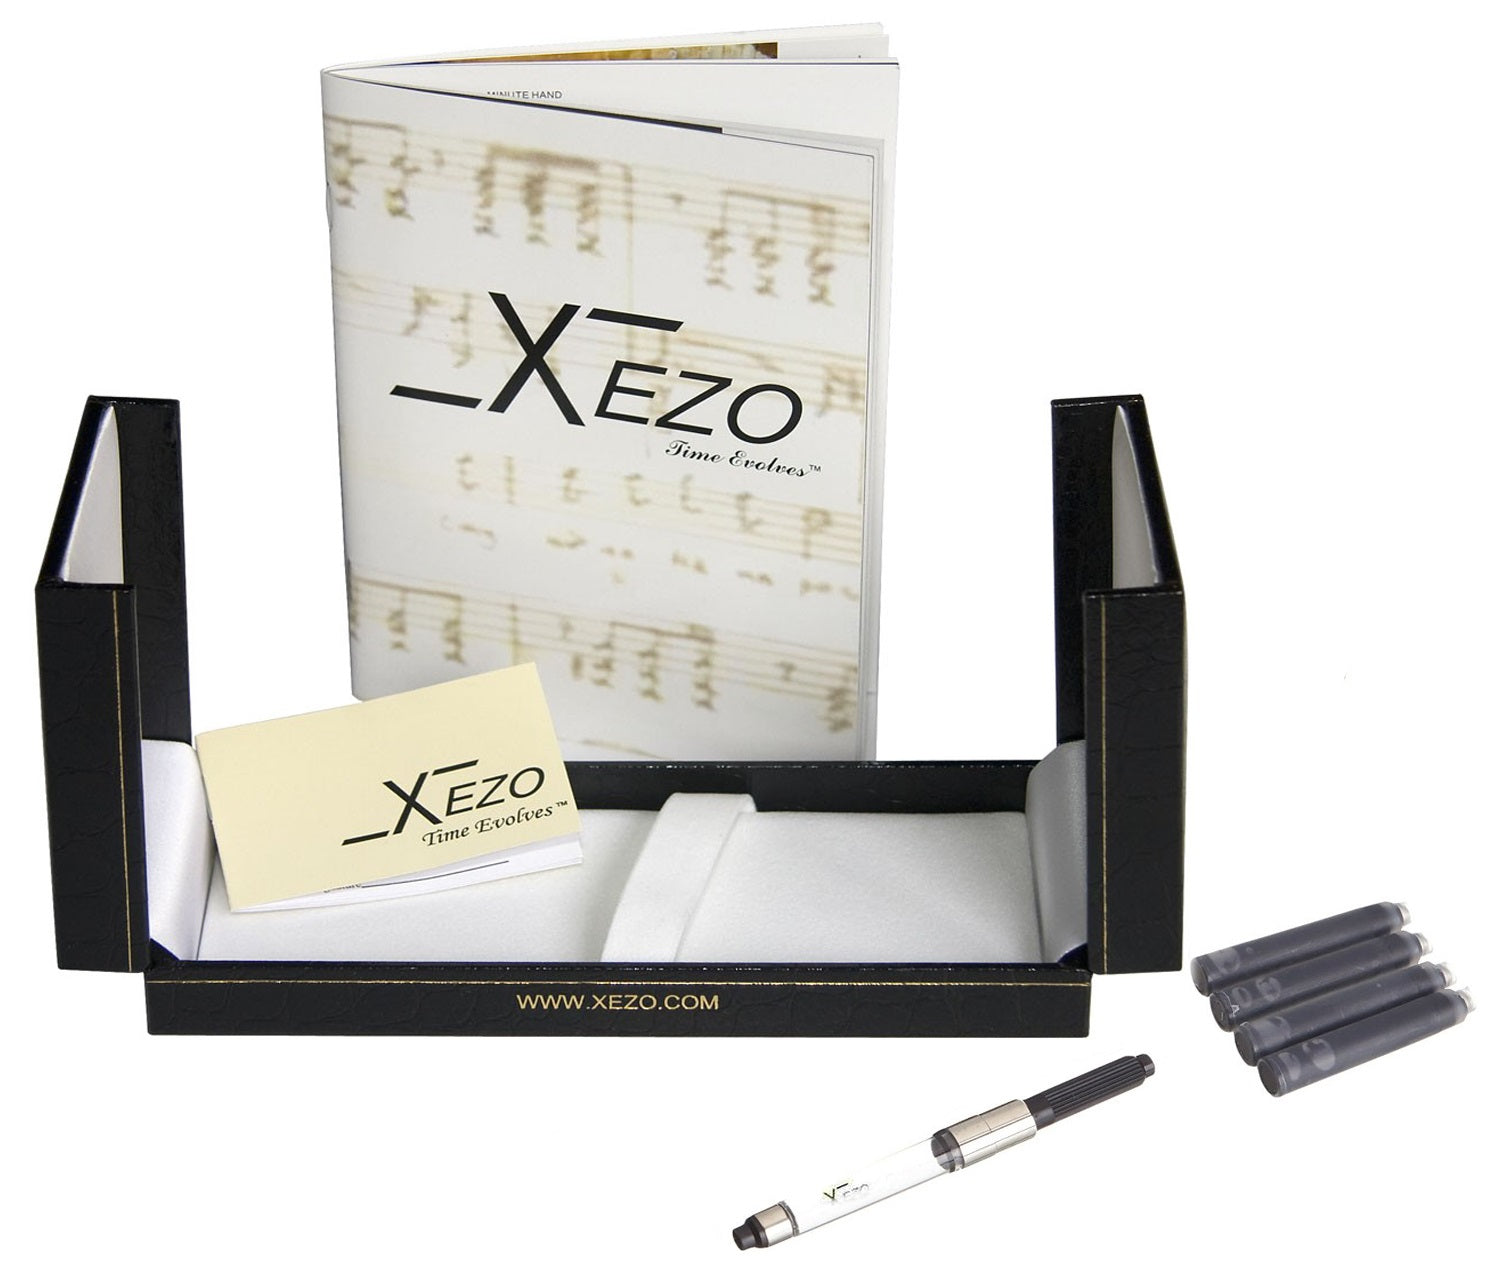 Xezo - Gift box with manual, certificate of quality, fountain ink converter, and four black fountain ink refills